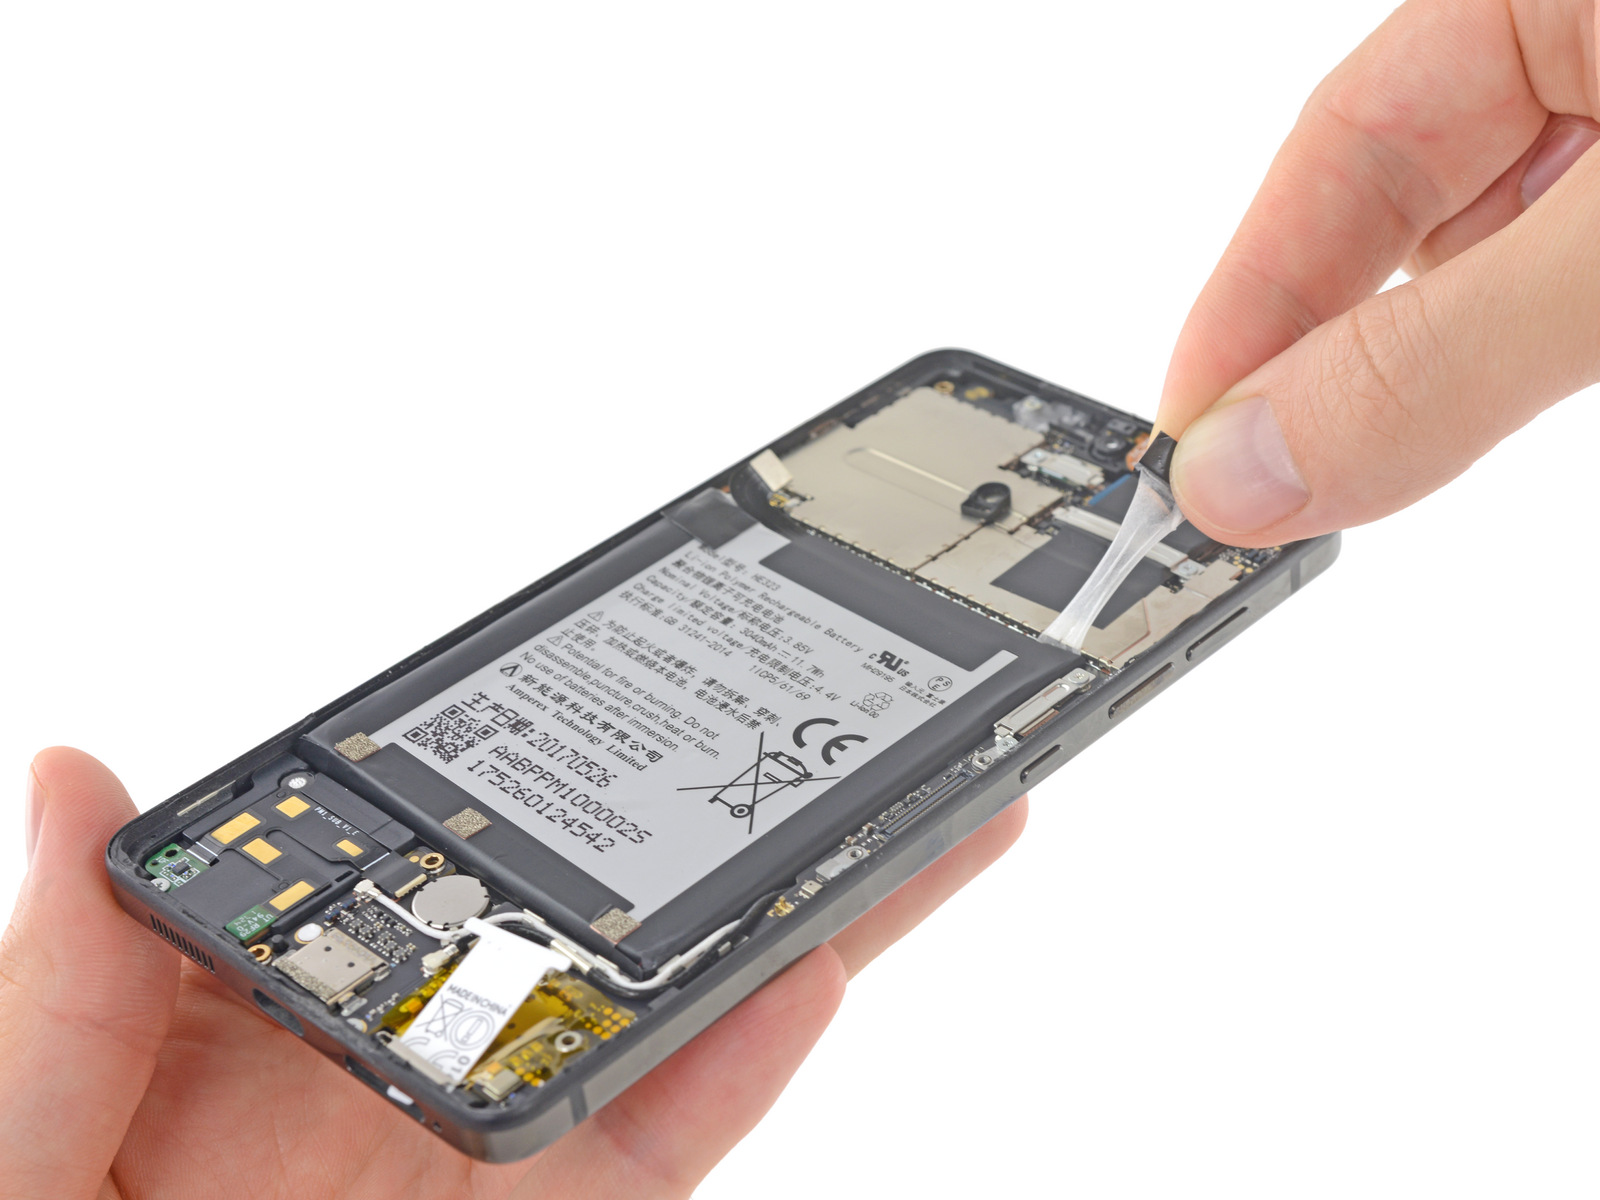 Ben_trong_Essential_Phone_iFixit_9.jpeg